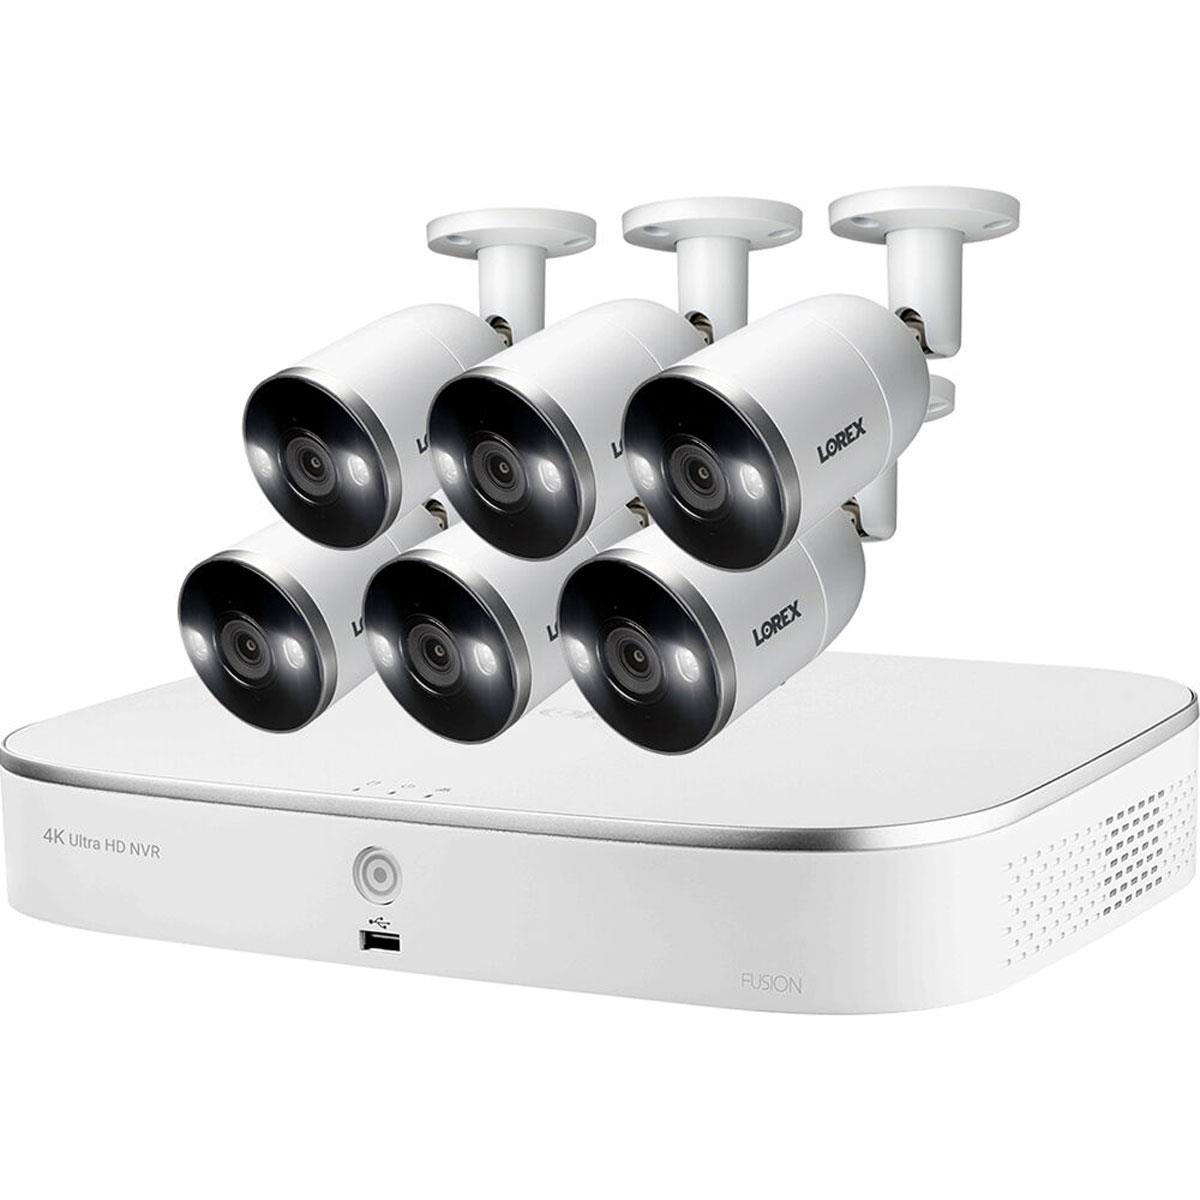 Lorex 4K PoE 8-Channel 3TB Fusion NVR System with 6x 8MP Bullet Cameras $649.99 + free shipping @ Adorama